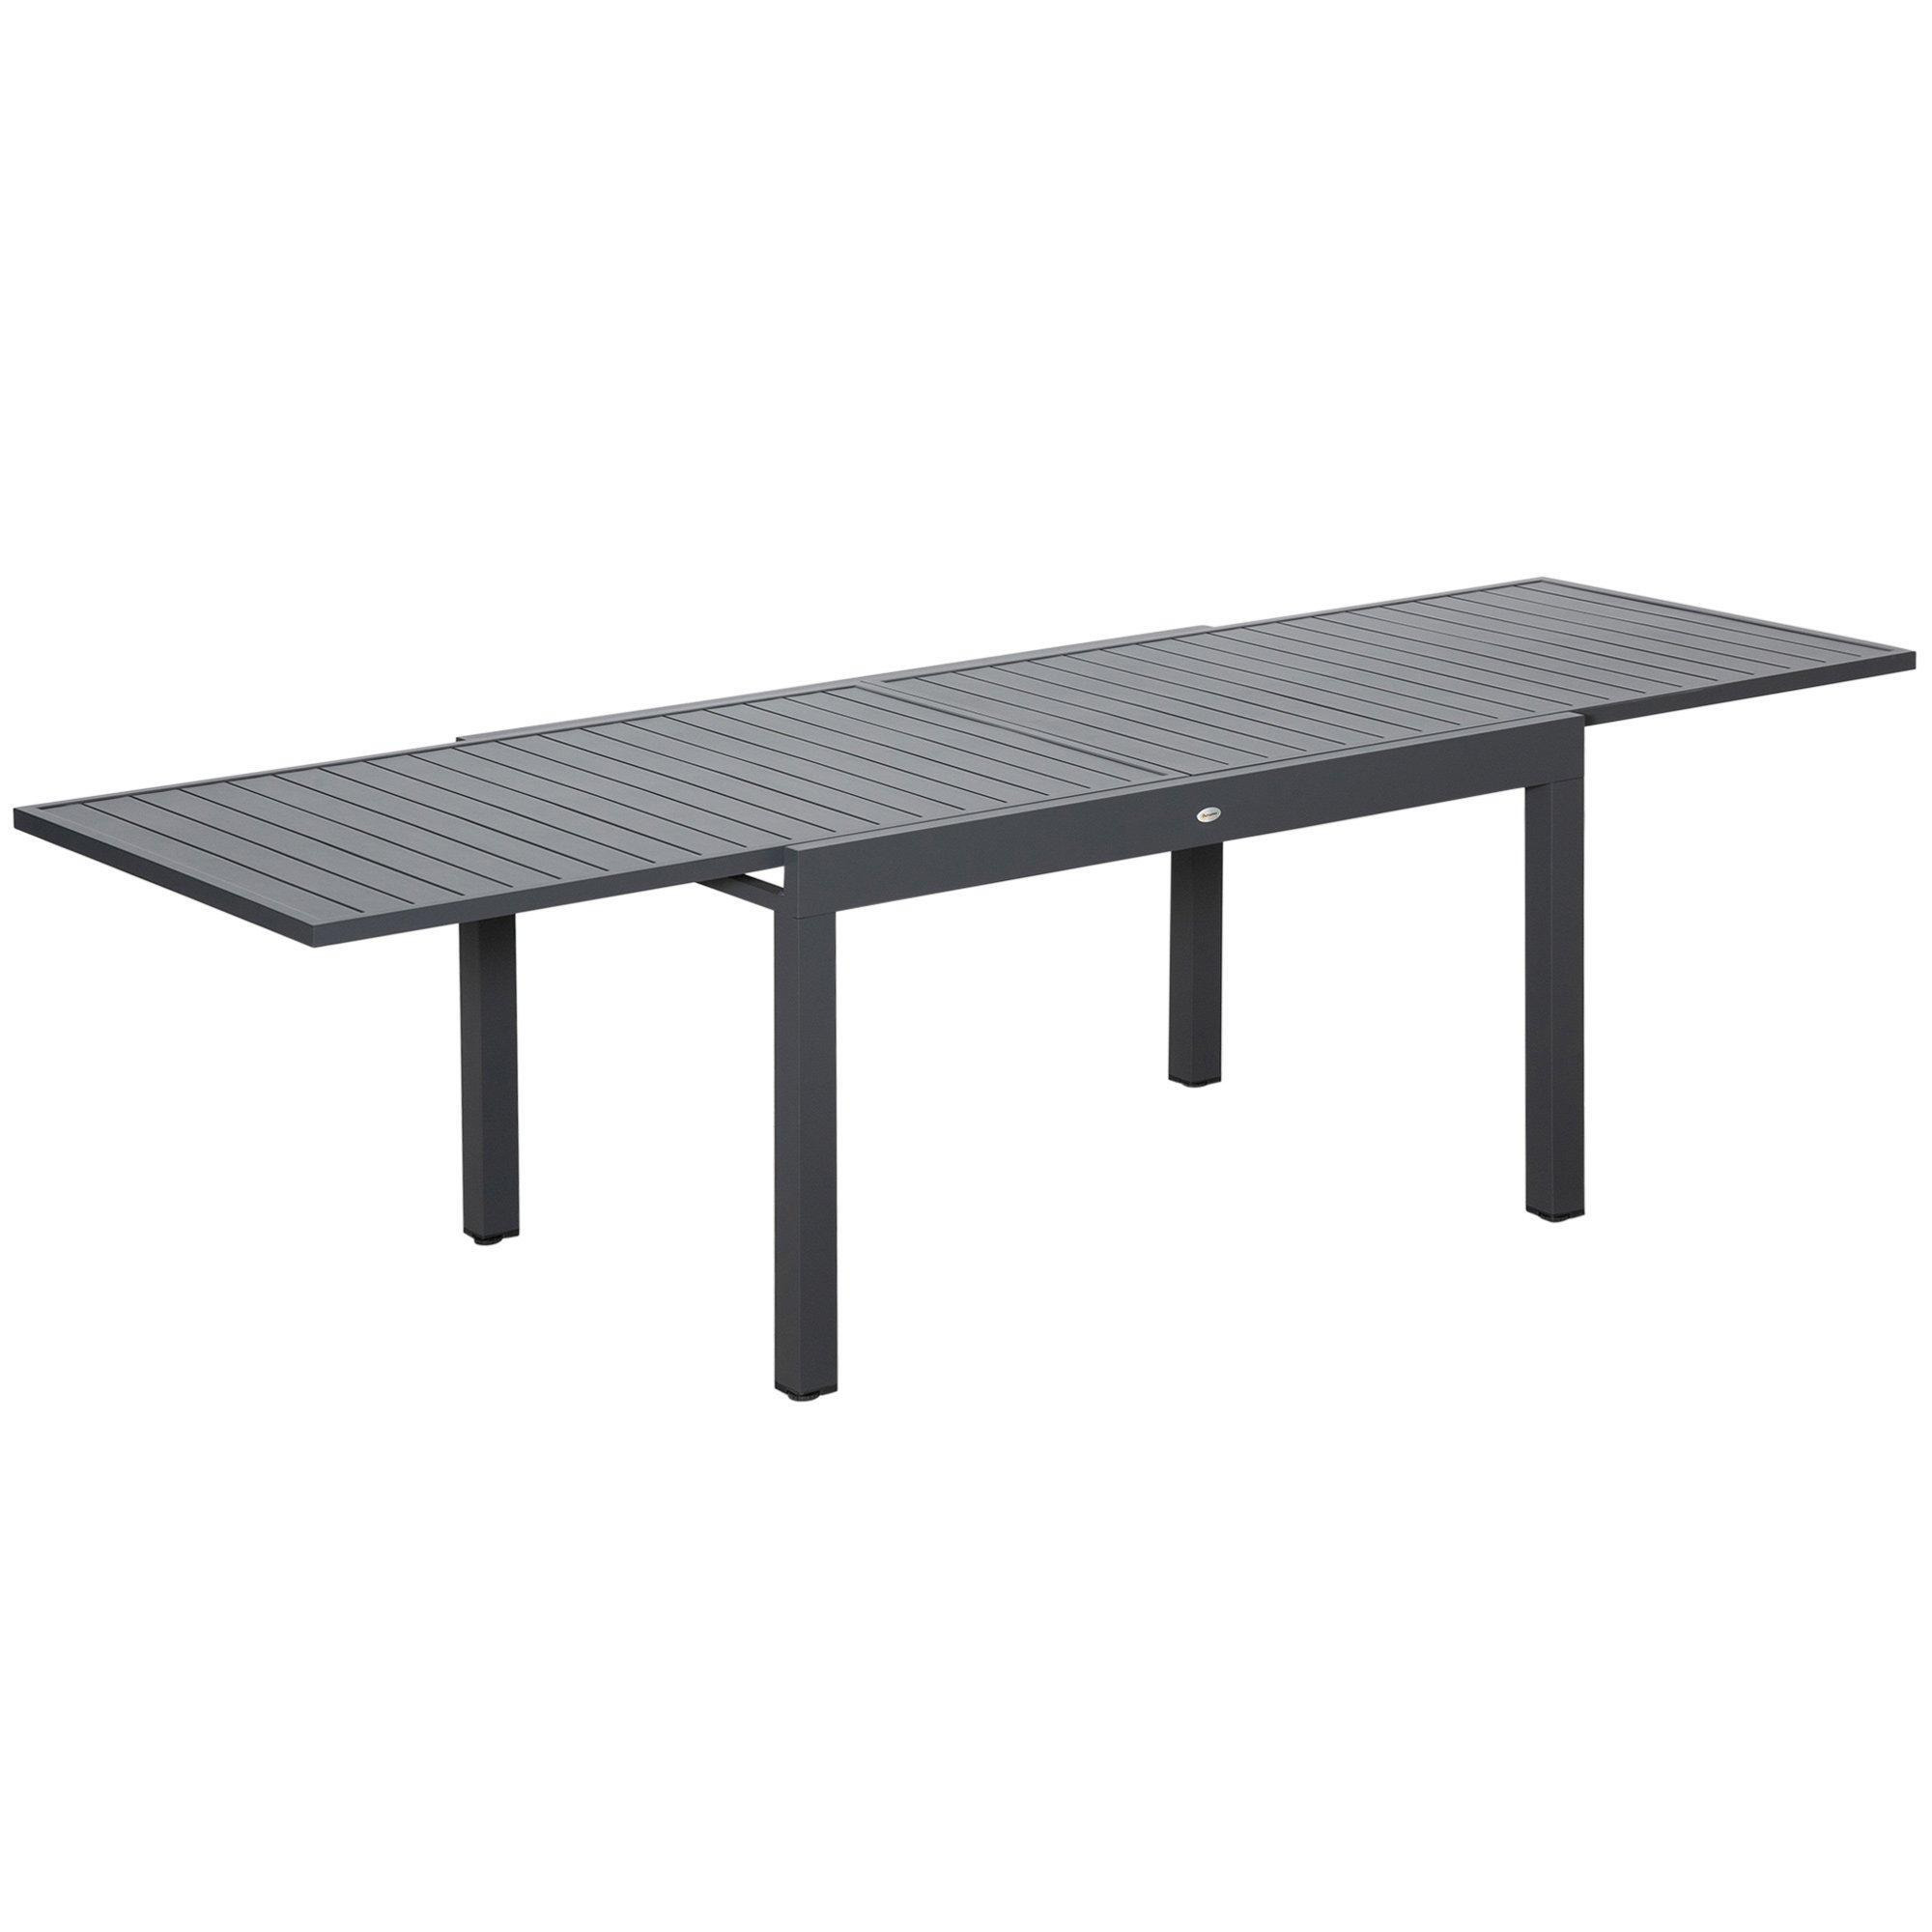 Extendable Garden Table 10 Seater for Lawn Balcony and Backyard - image 1